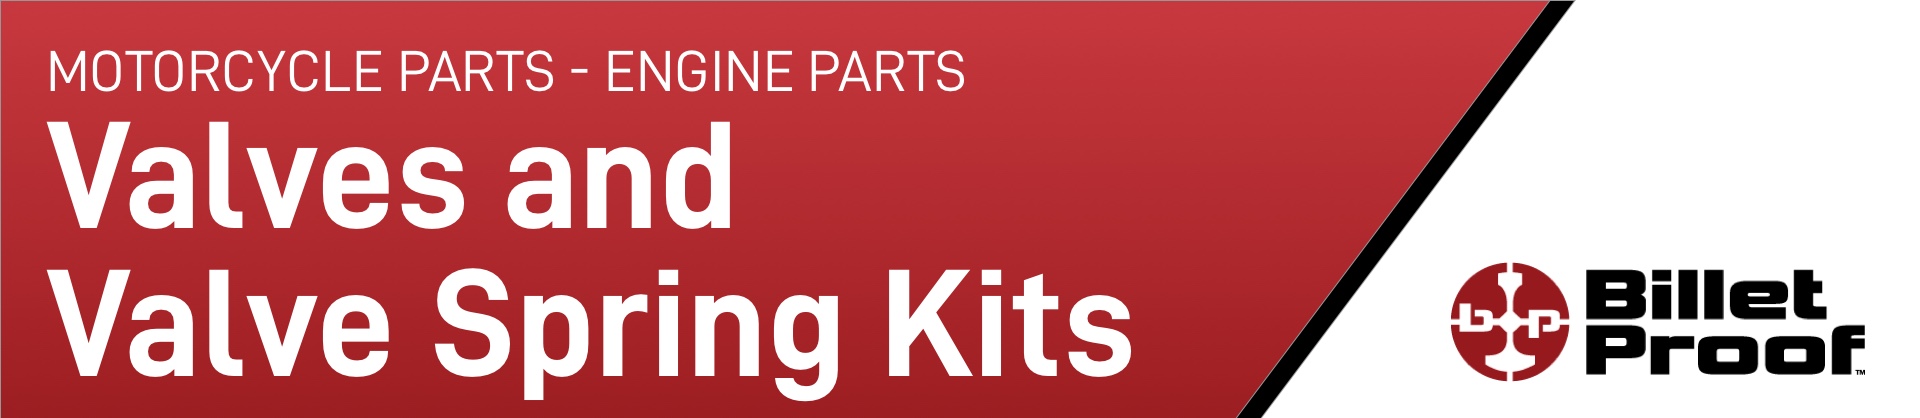 motorcycle-parts-engine-parts-valves-and-valve-spring-kits.jpg